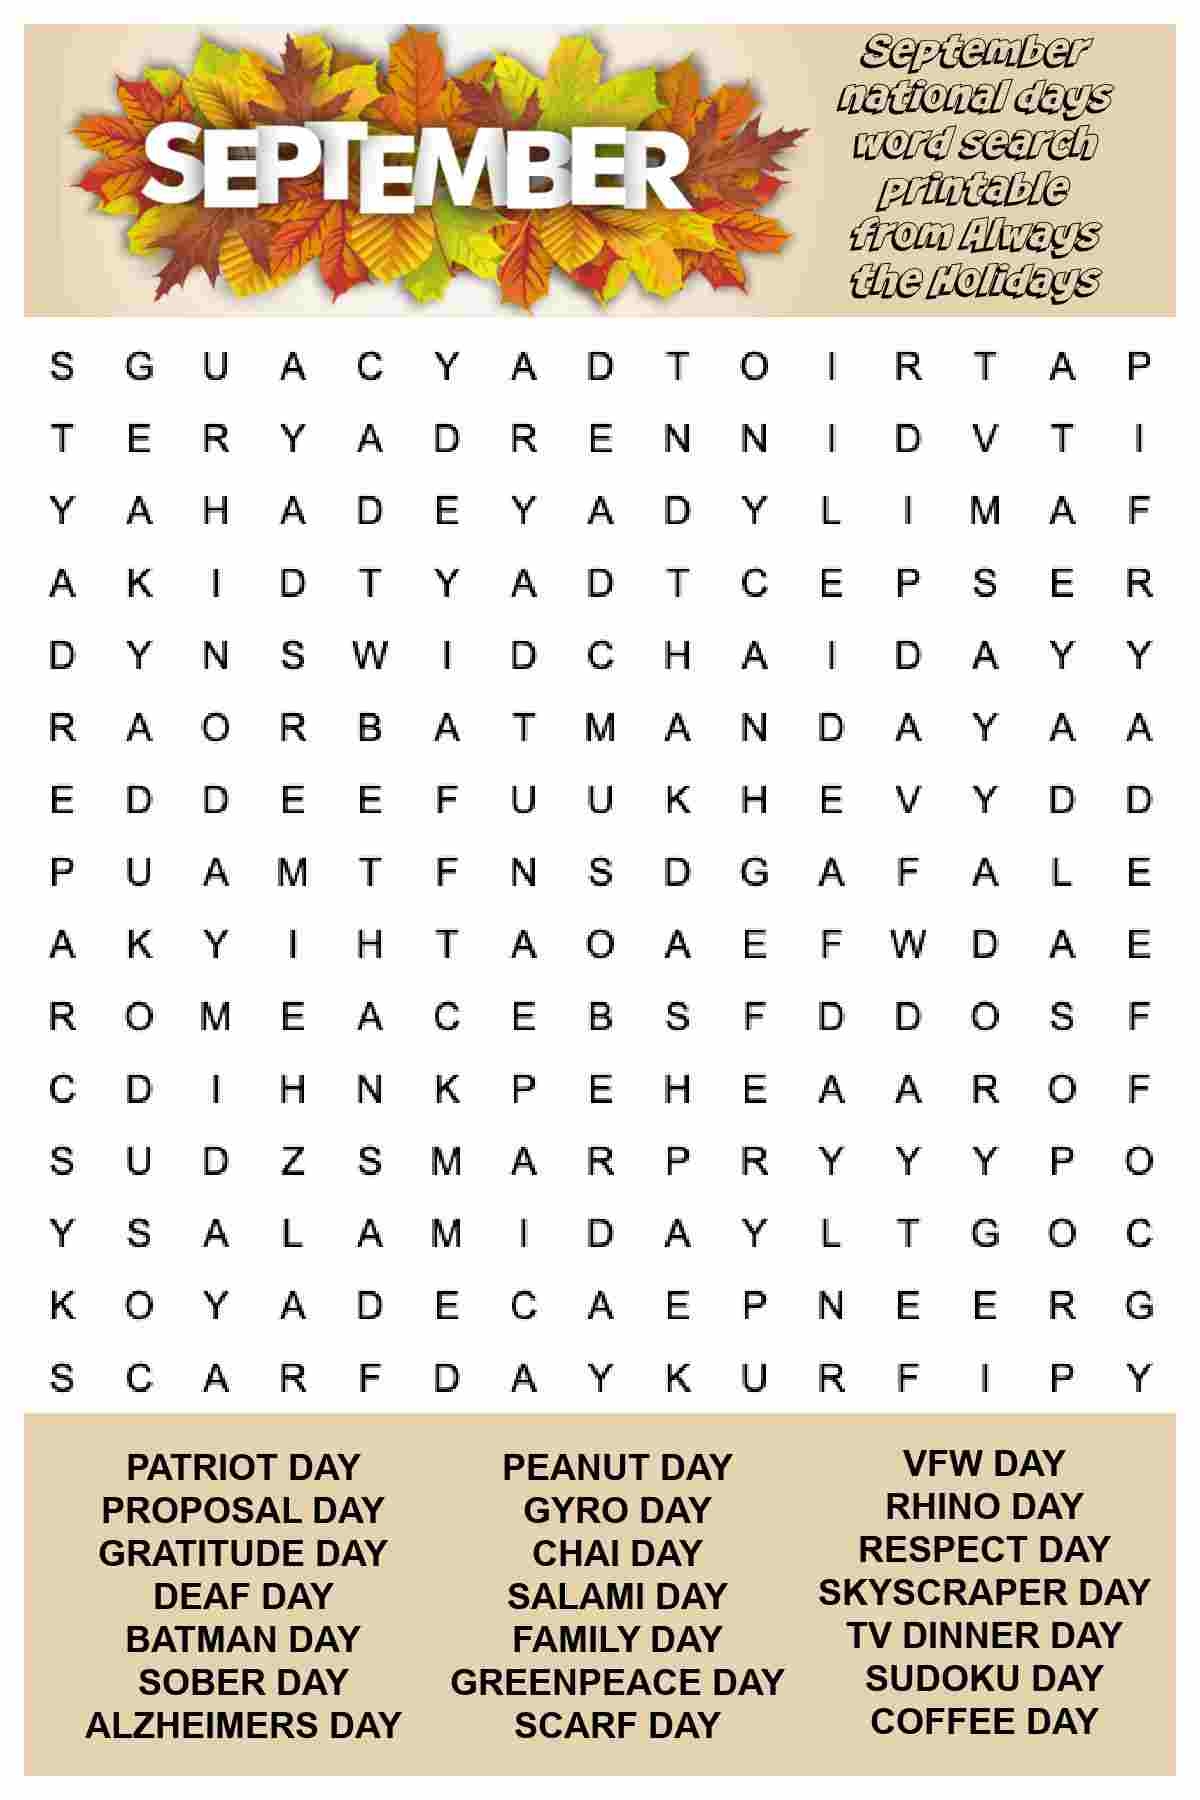 september-word-search-printable-national-days-word-find-puzzle-word